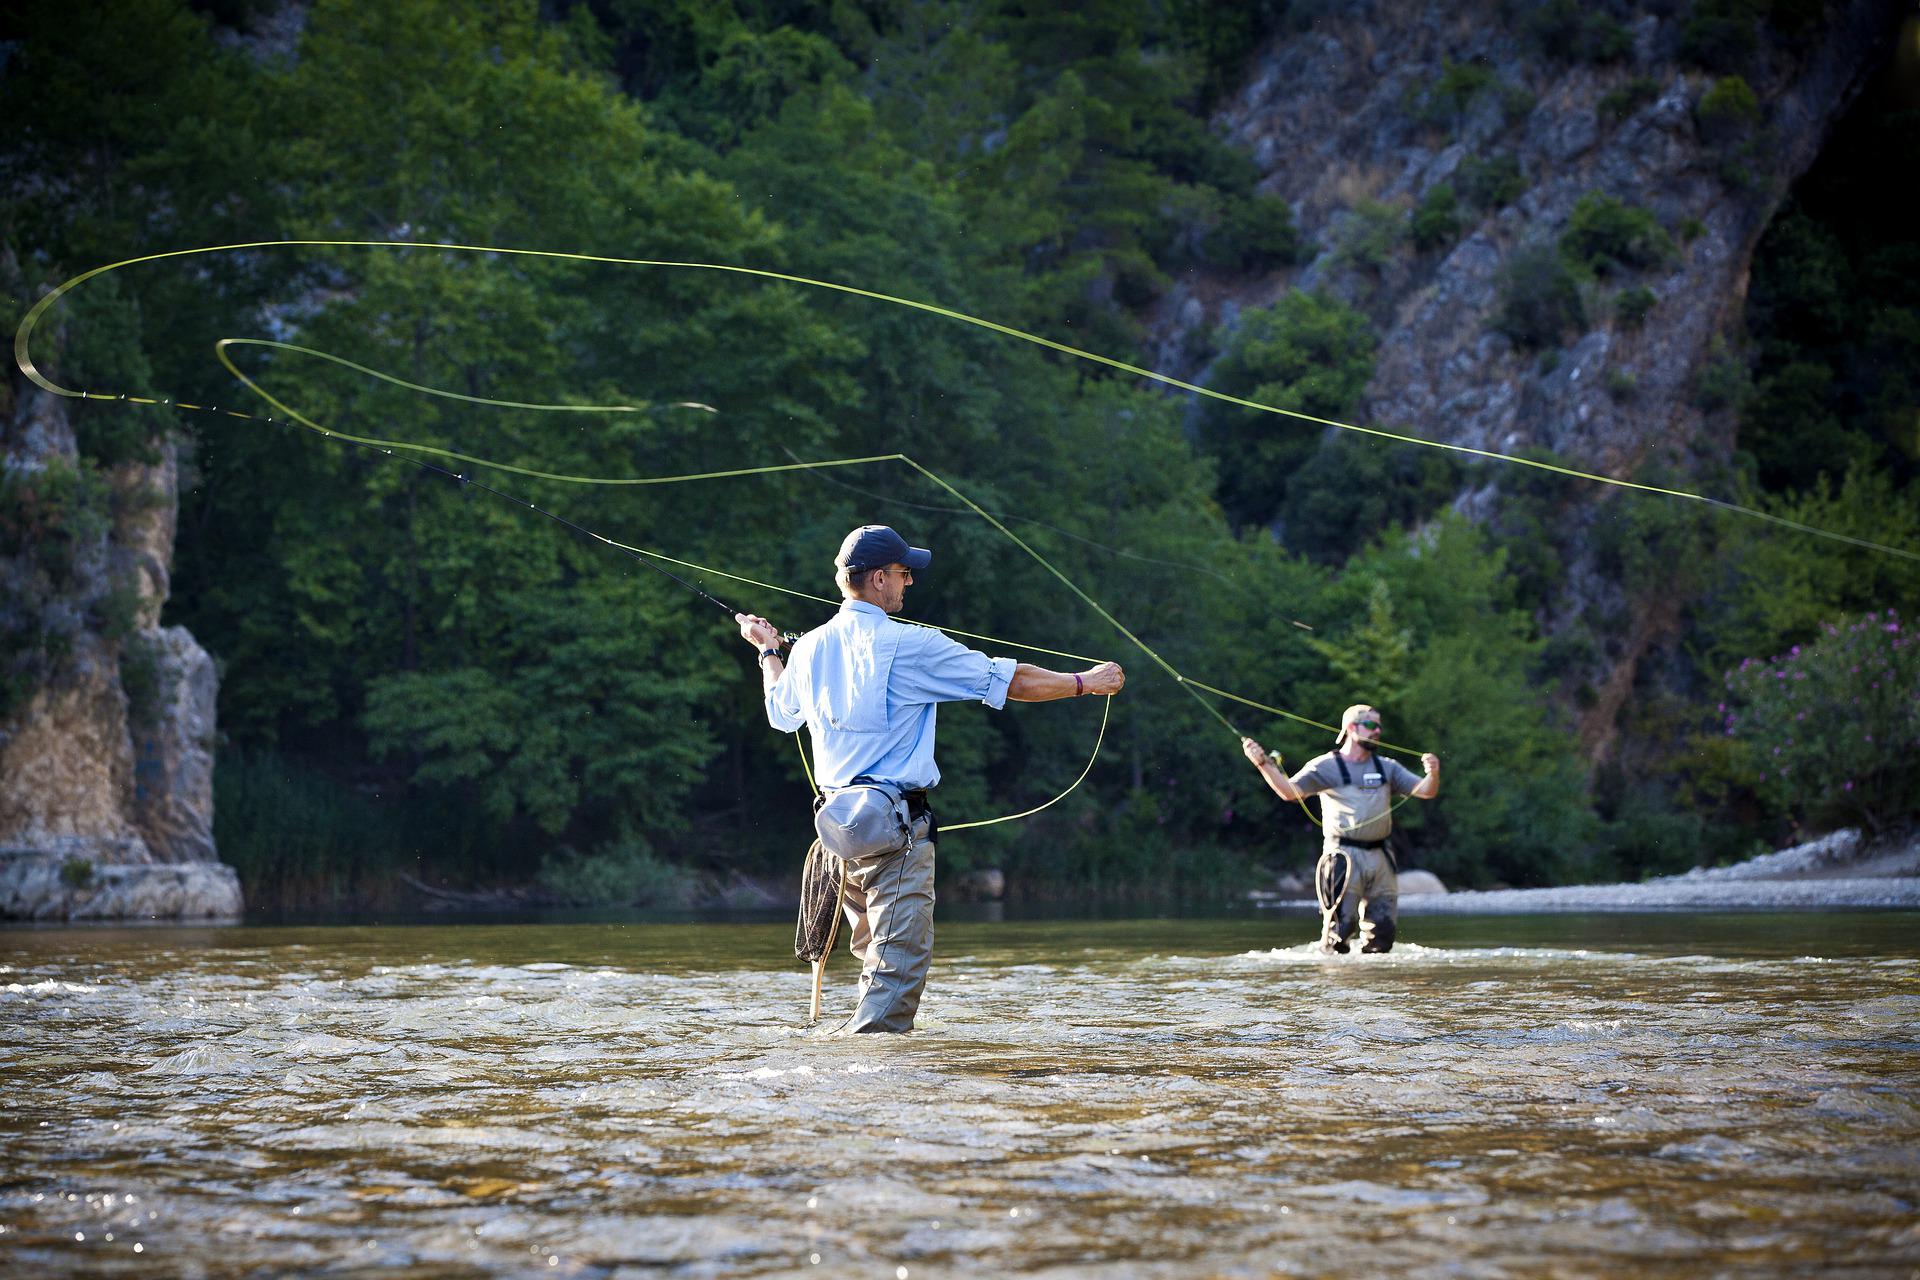 Fly Fishing Advice You Should Ignore